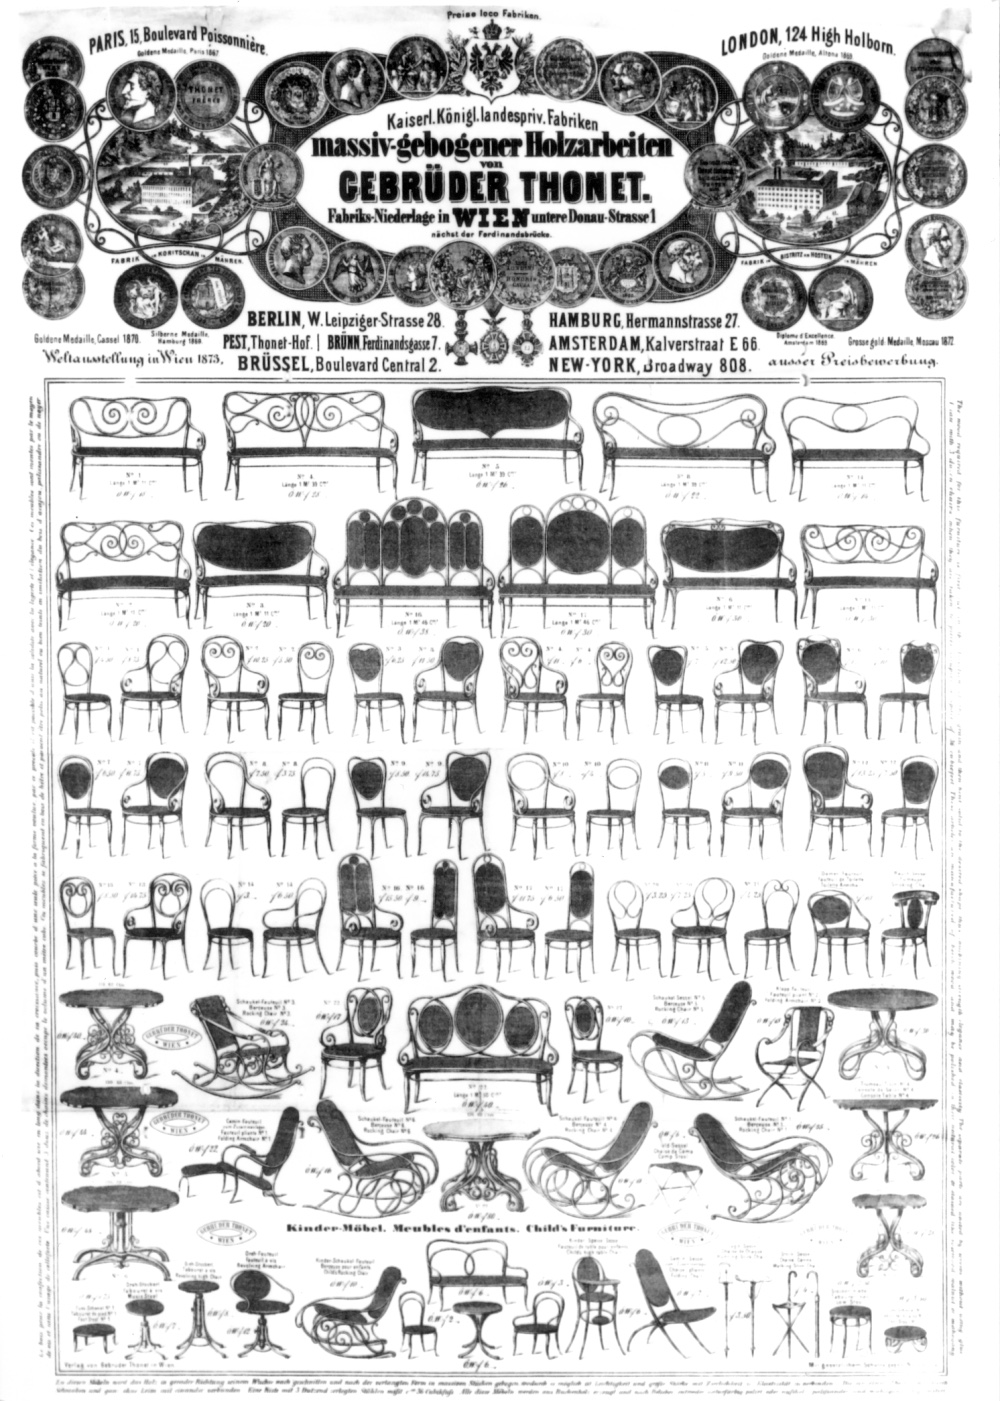 A old brochure showing all the TON chairs and sofas.